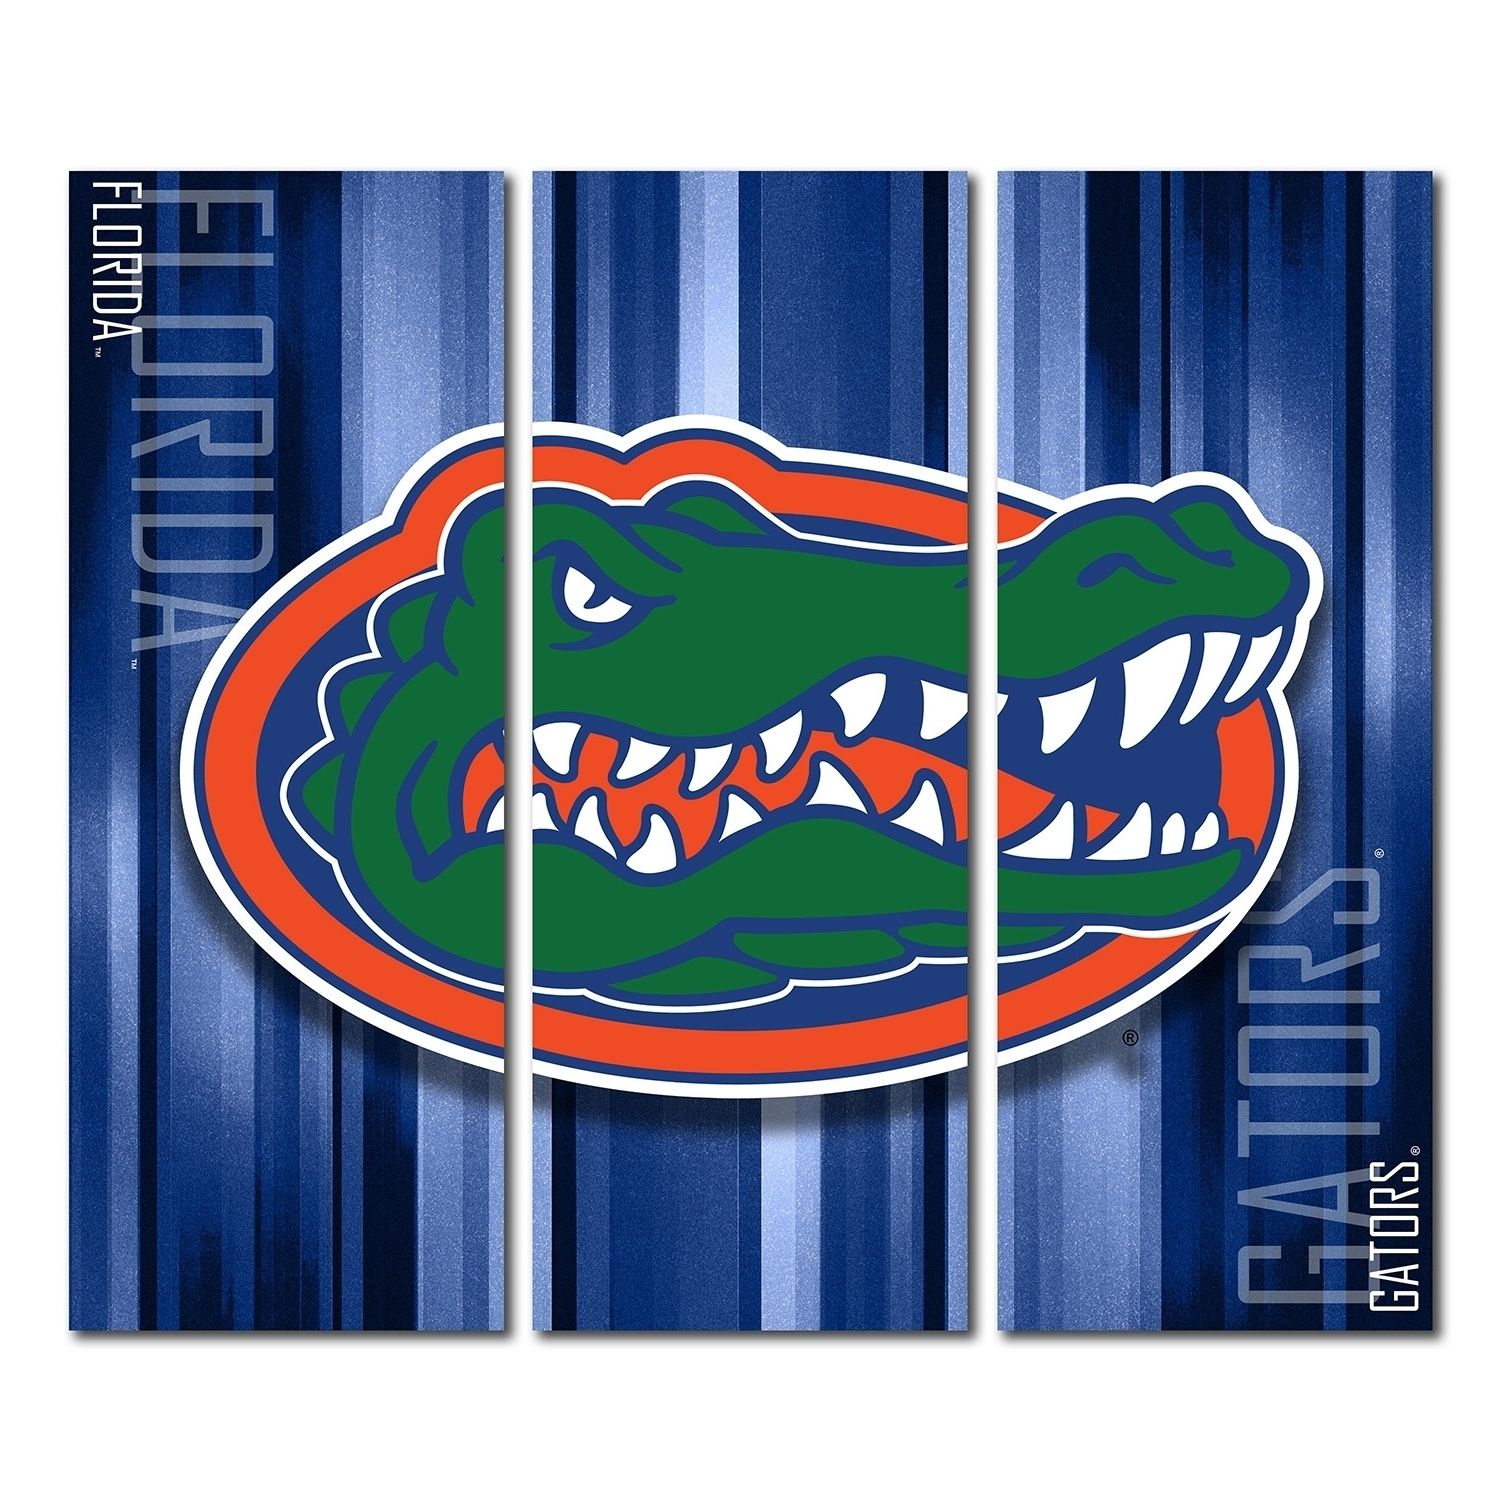 Florida Wall Art Pertaining To 2017 Image Gallery Of Florida Gator Wall Art View 3 15 Photos Stunning (View 12 of 20)